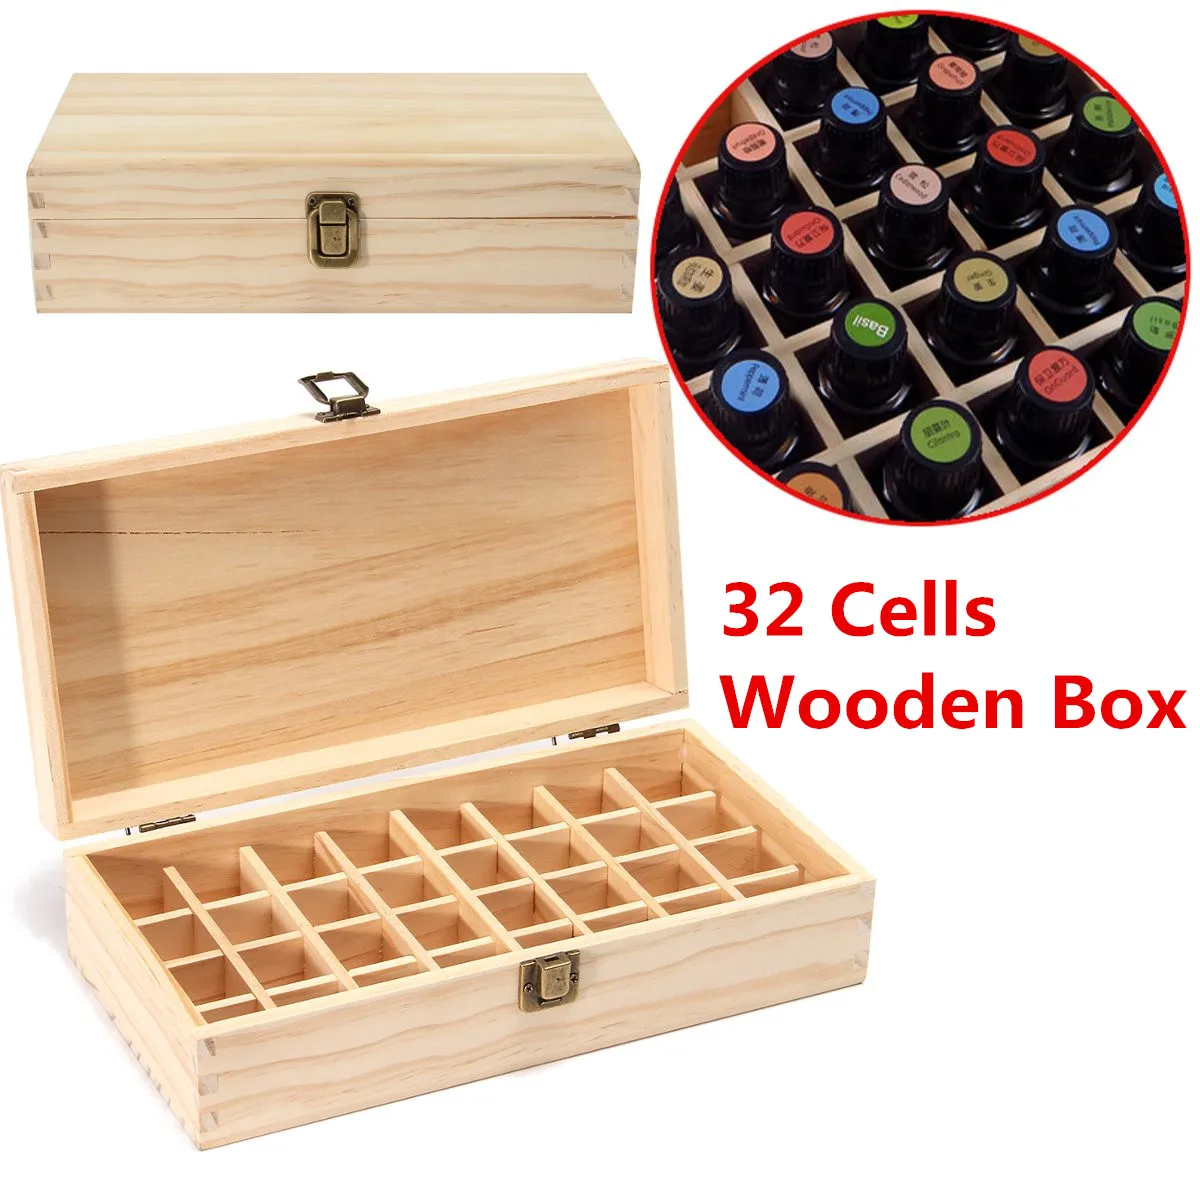 

32 Grids Essential Oil Natural Wood Box Aromatherapy Wooden Box Treasure Jewelry Storage Organizer Handmade Craft for Home Decor